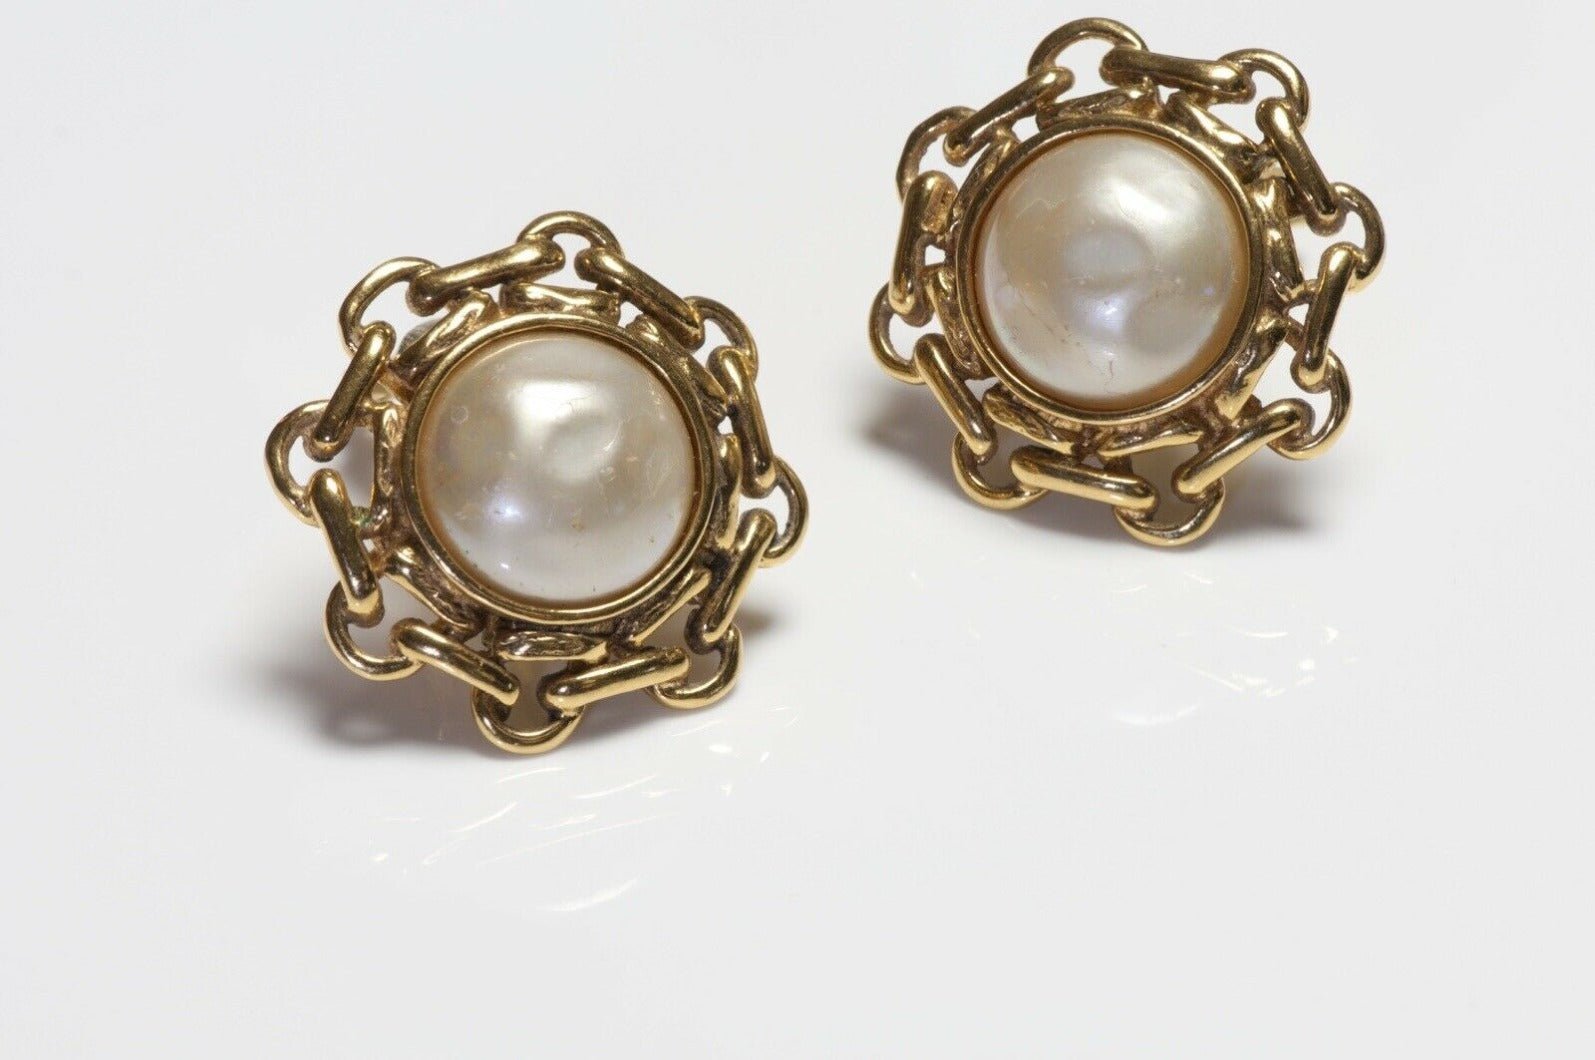 CHANEL Paris 1980’s Gold Plated Faux Pearl Camellia Flower Earrings